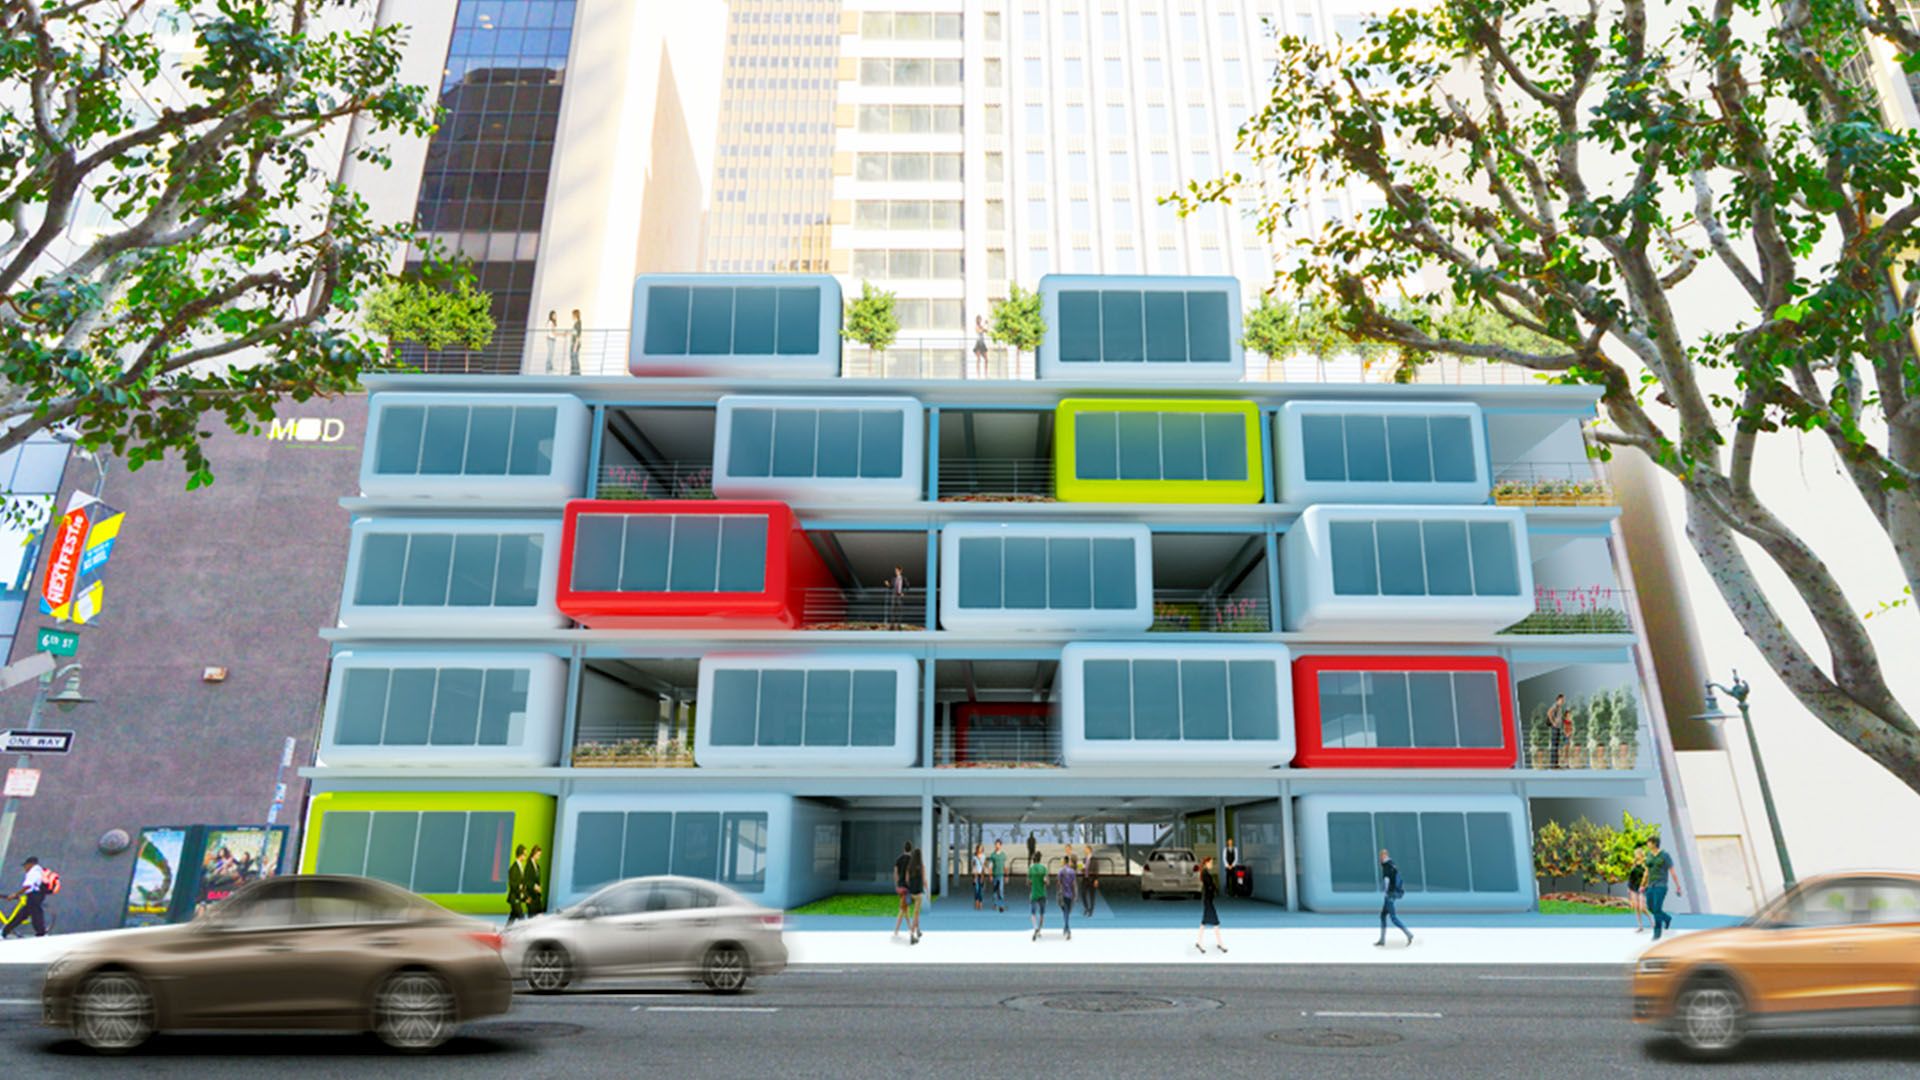 Architectural rendering of a repurposed parking garage